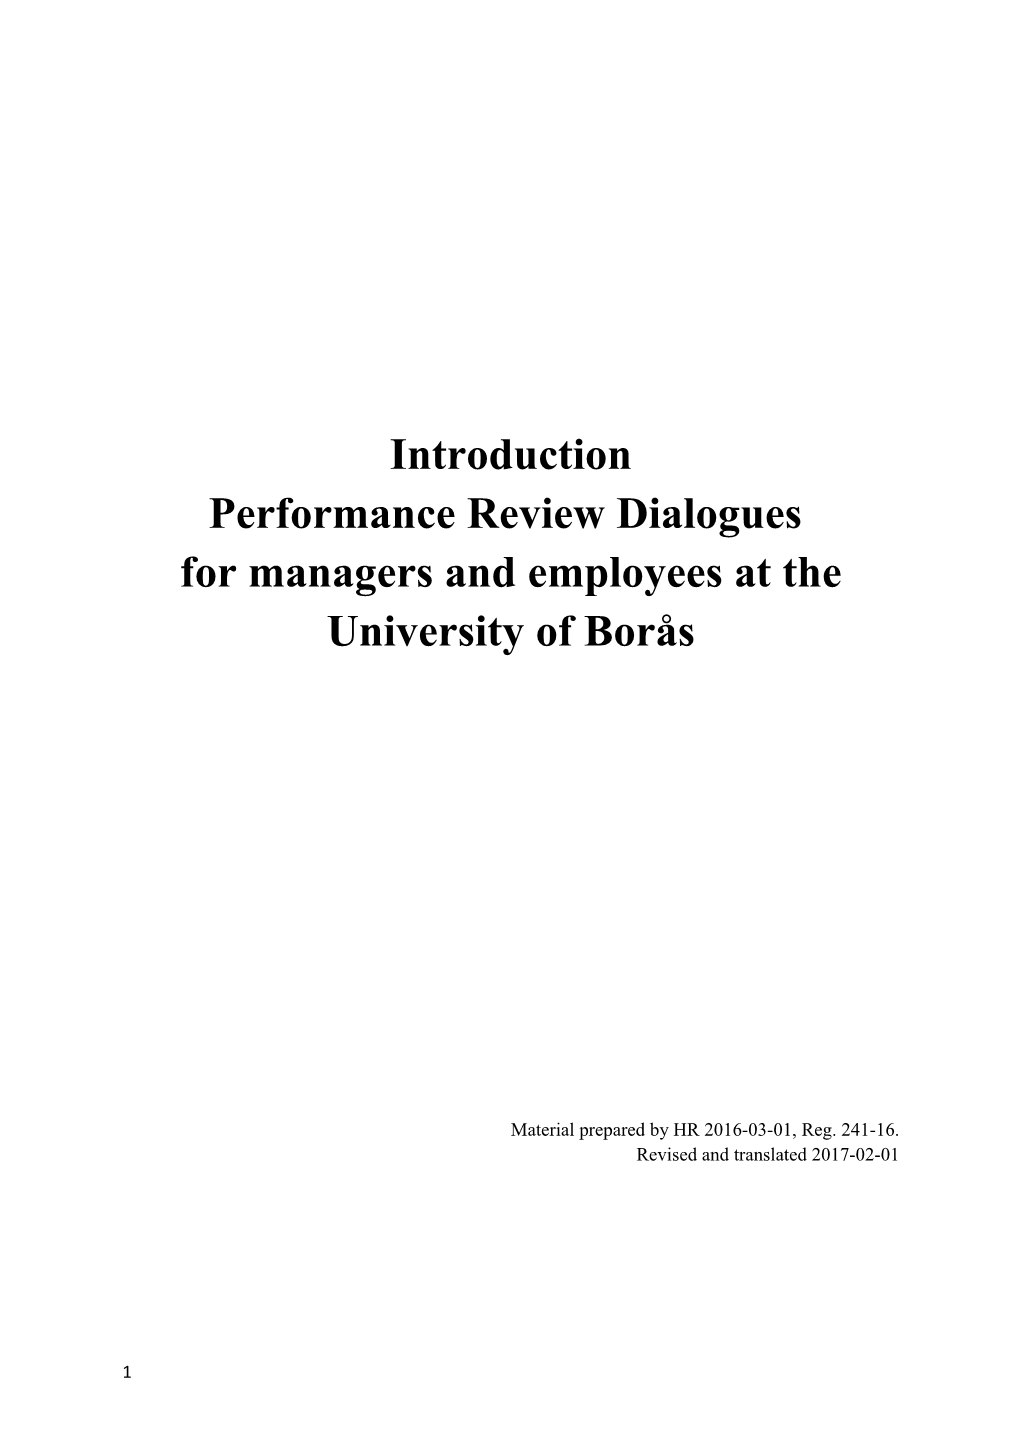 For Managers and Employees at the University of Borås